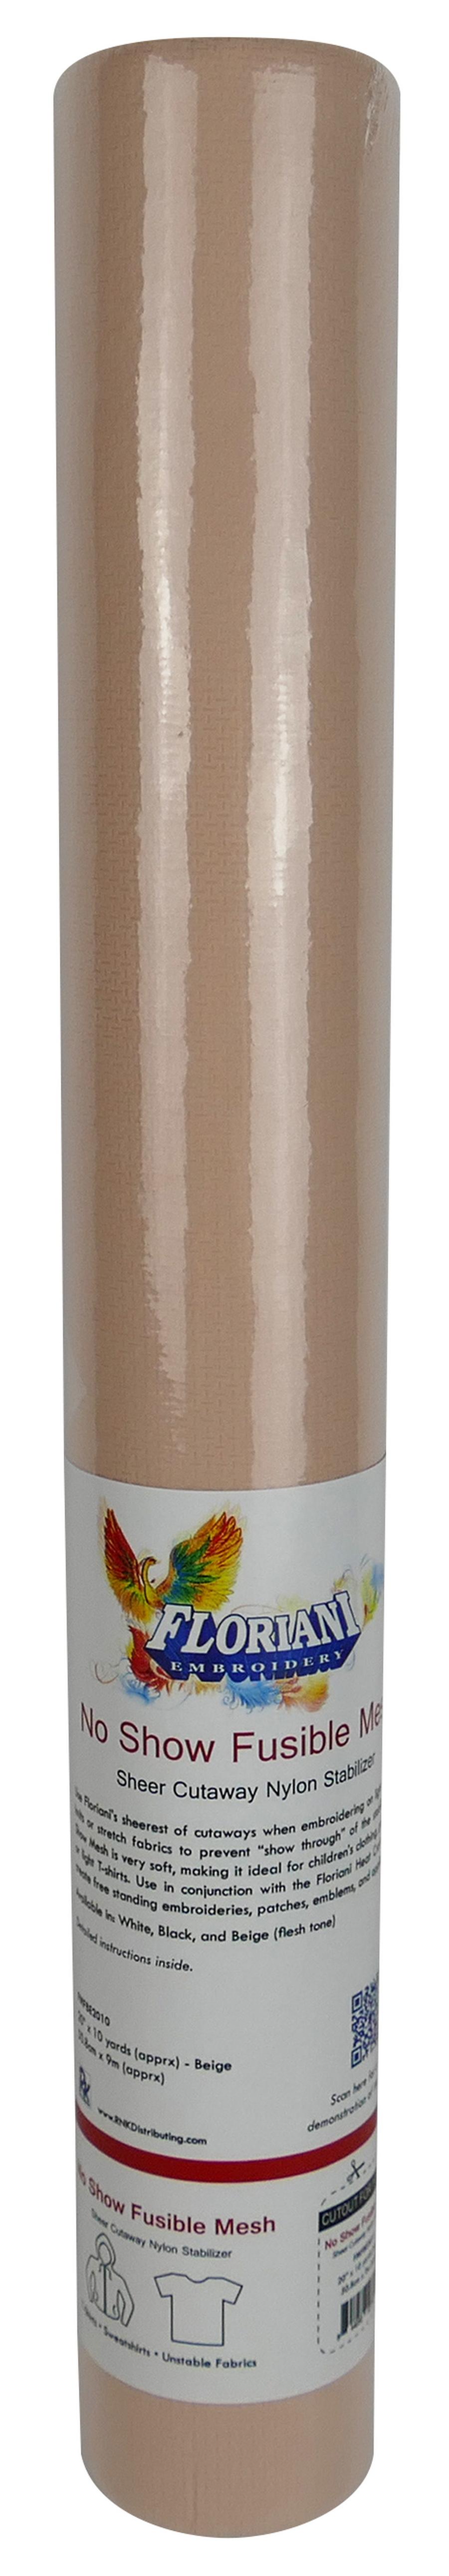 Floriani Mesh Fusible Beige, 20 in. x 10 yds.